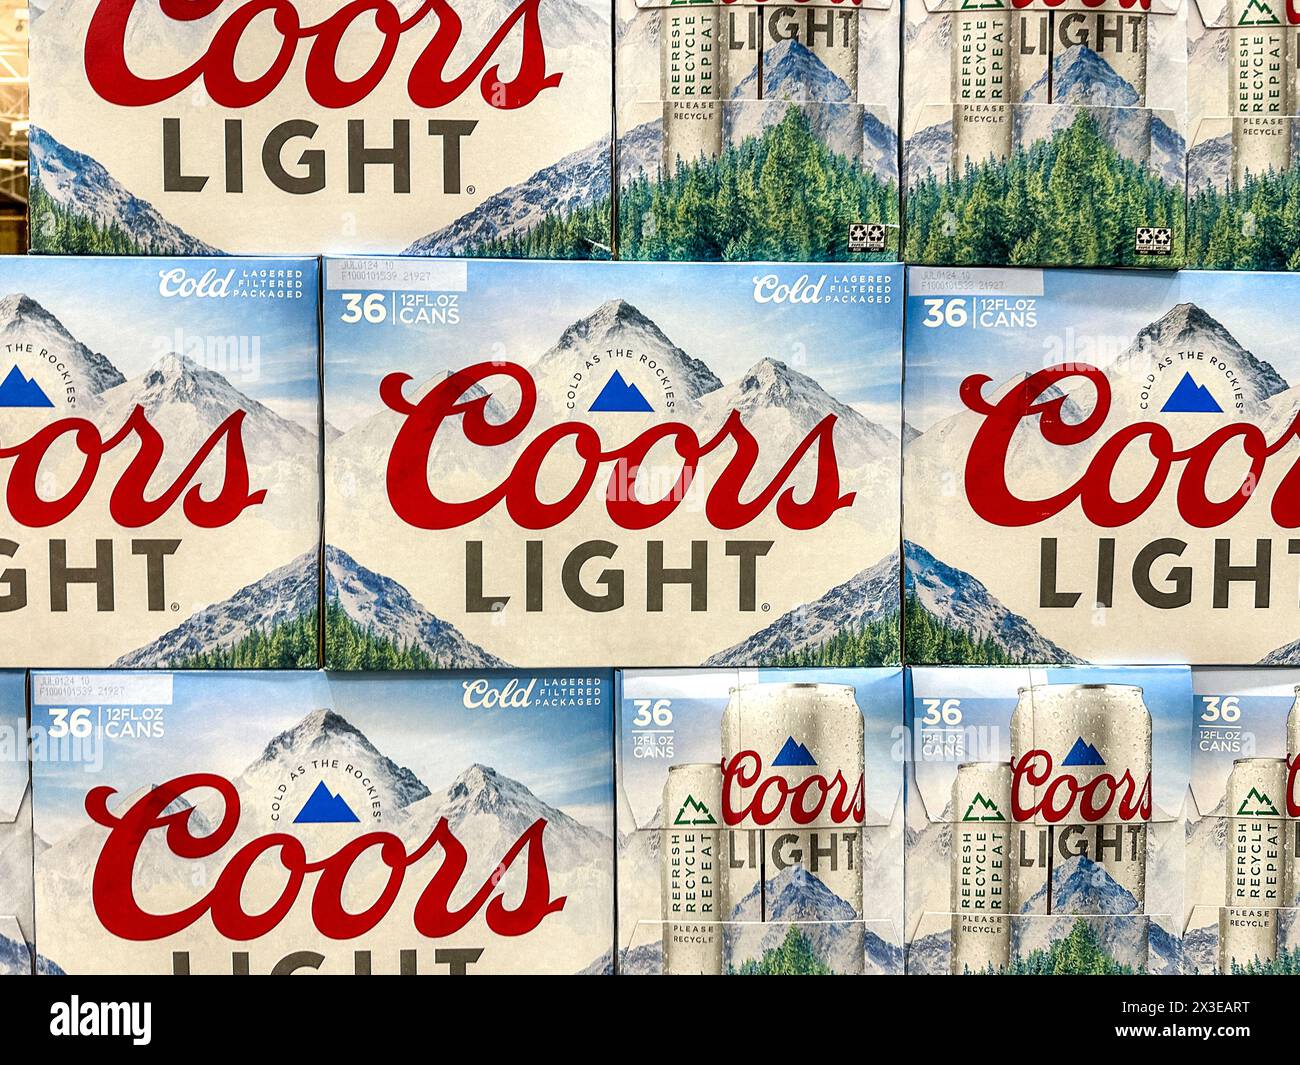 Cases of Coors Light Beer at a Costco Wholesale warehouse Stock Photo